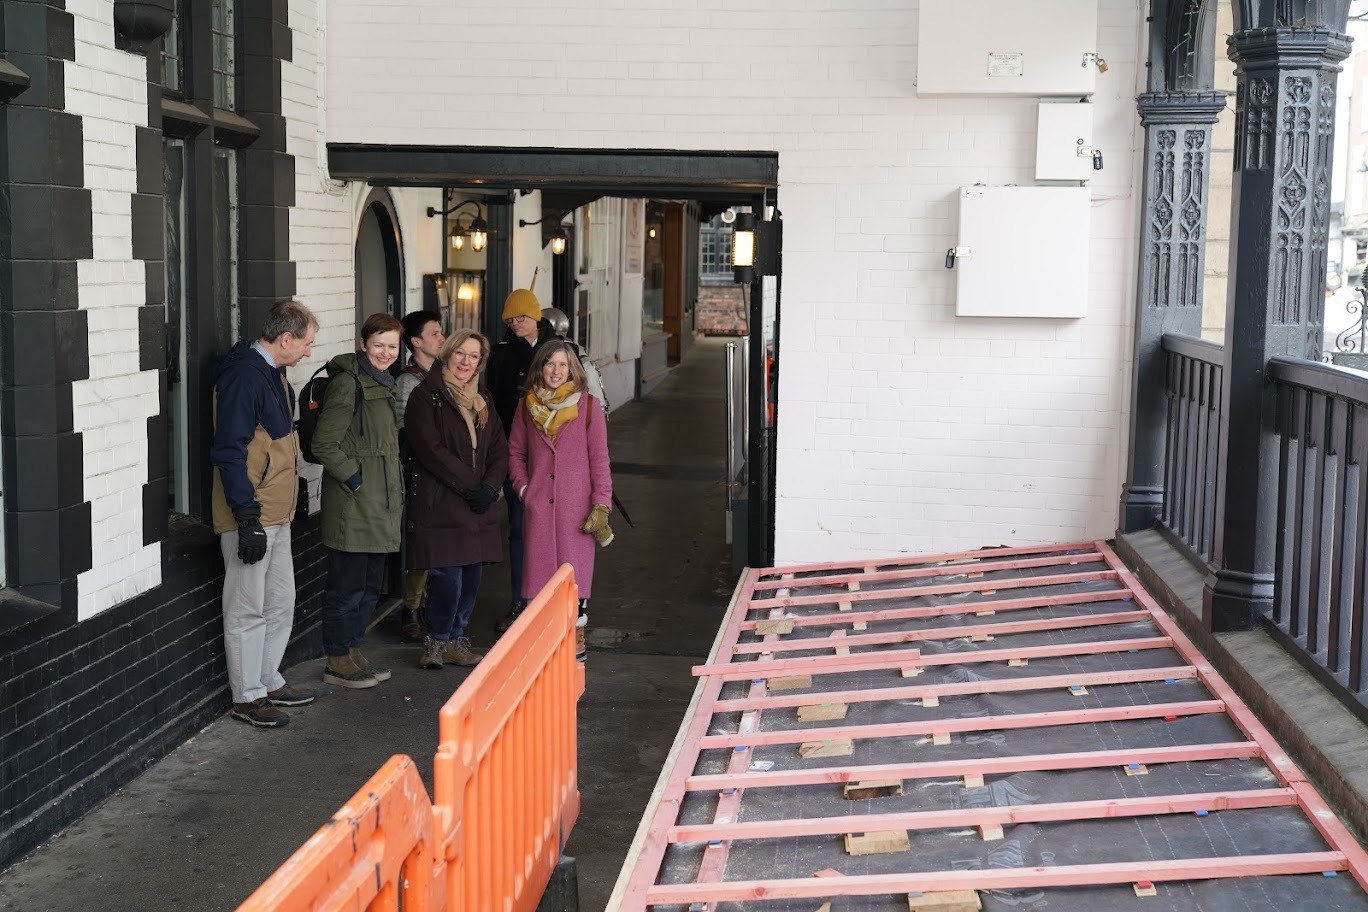 The tour looking at improvements being made to the rows walkway area with the timber flooring and balustrade.